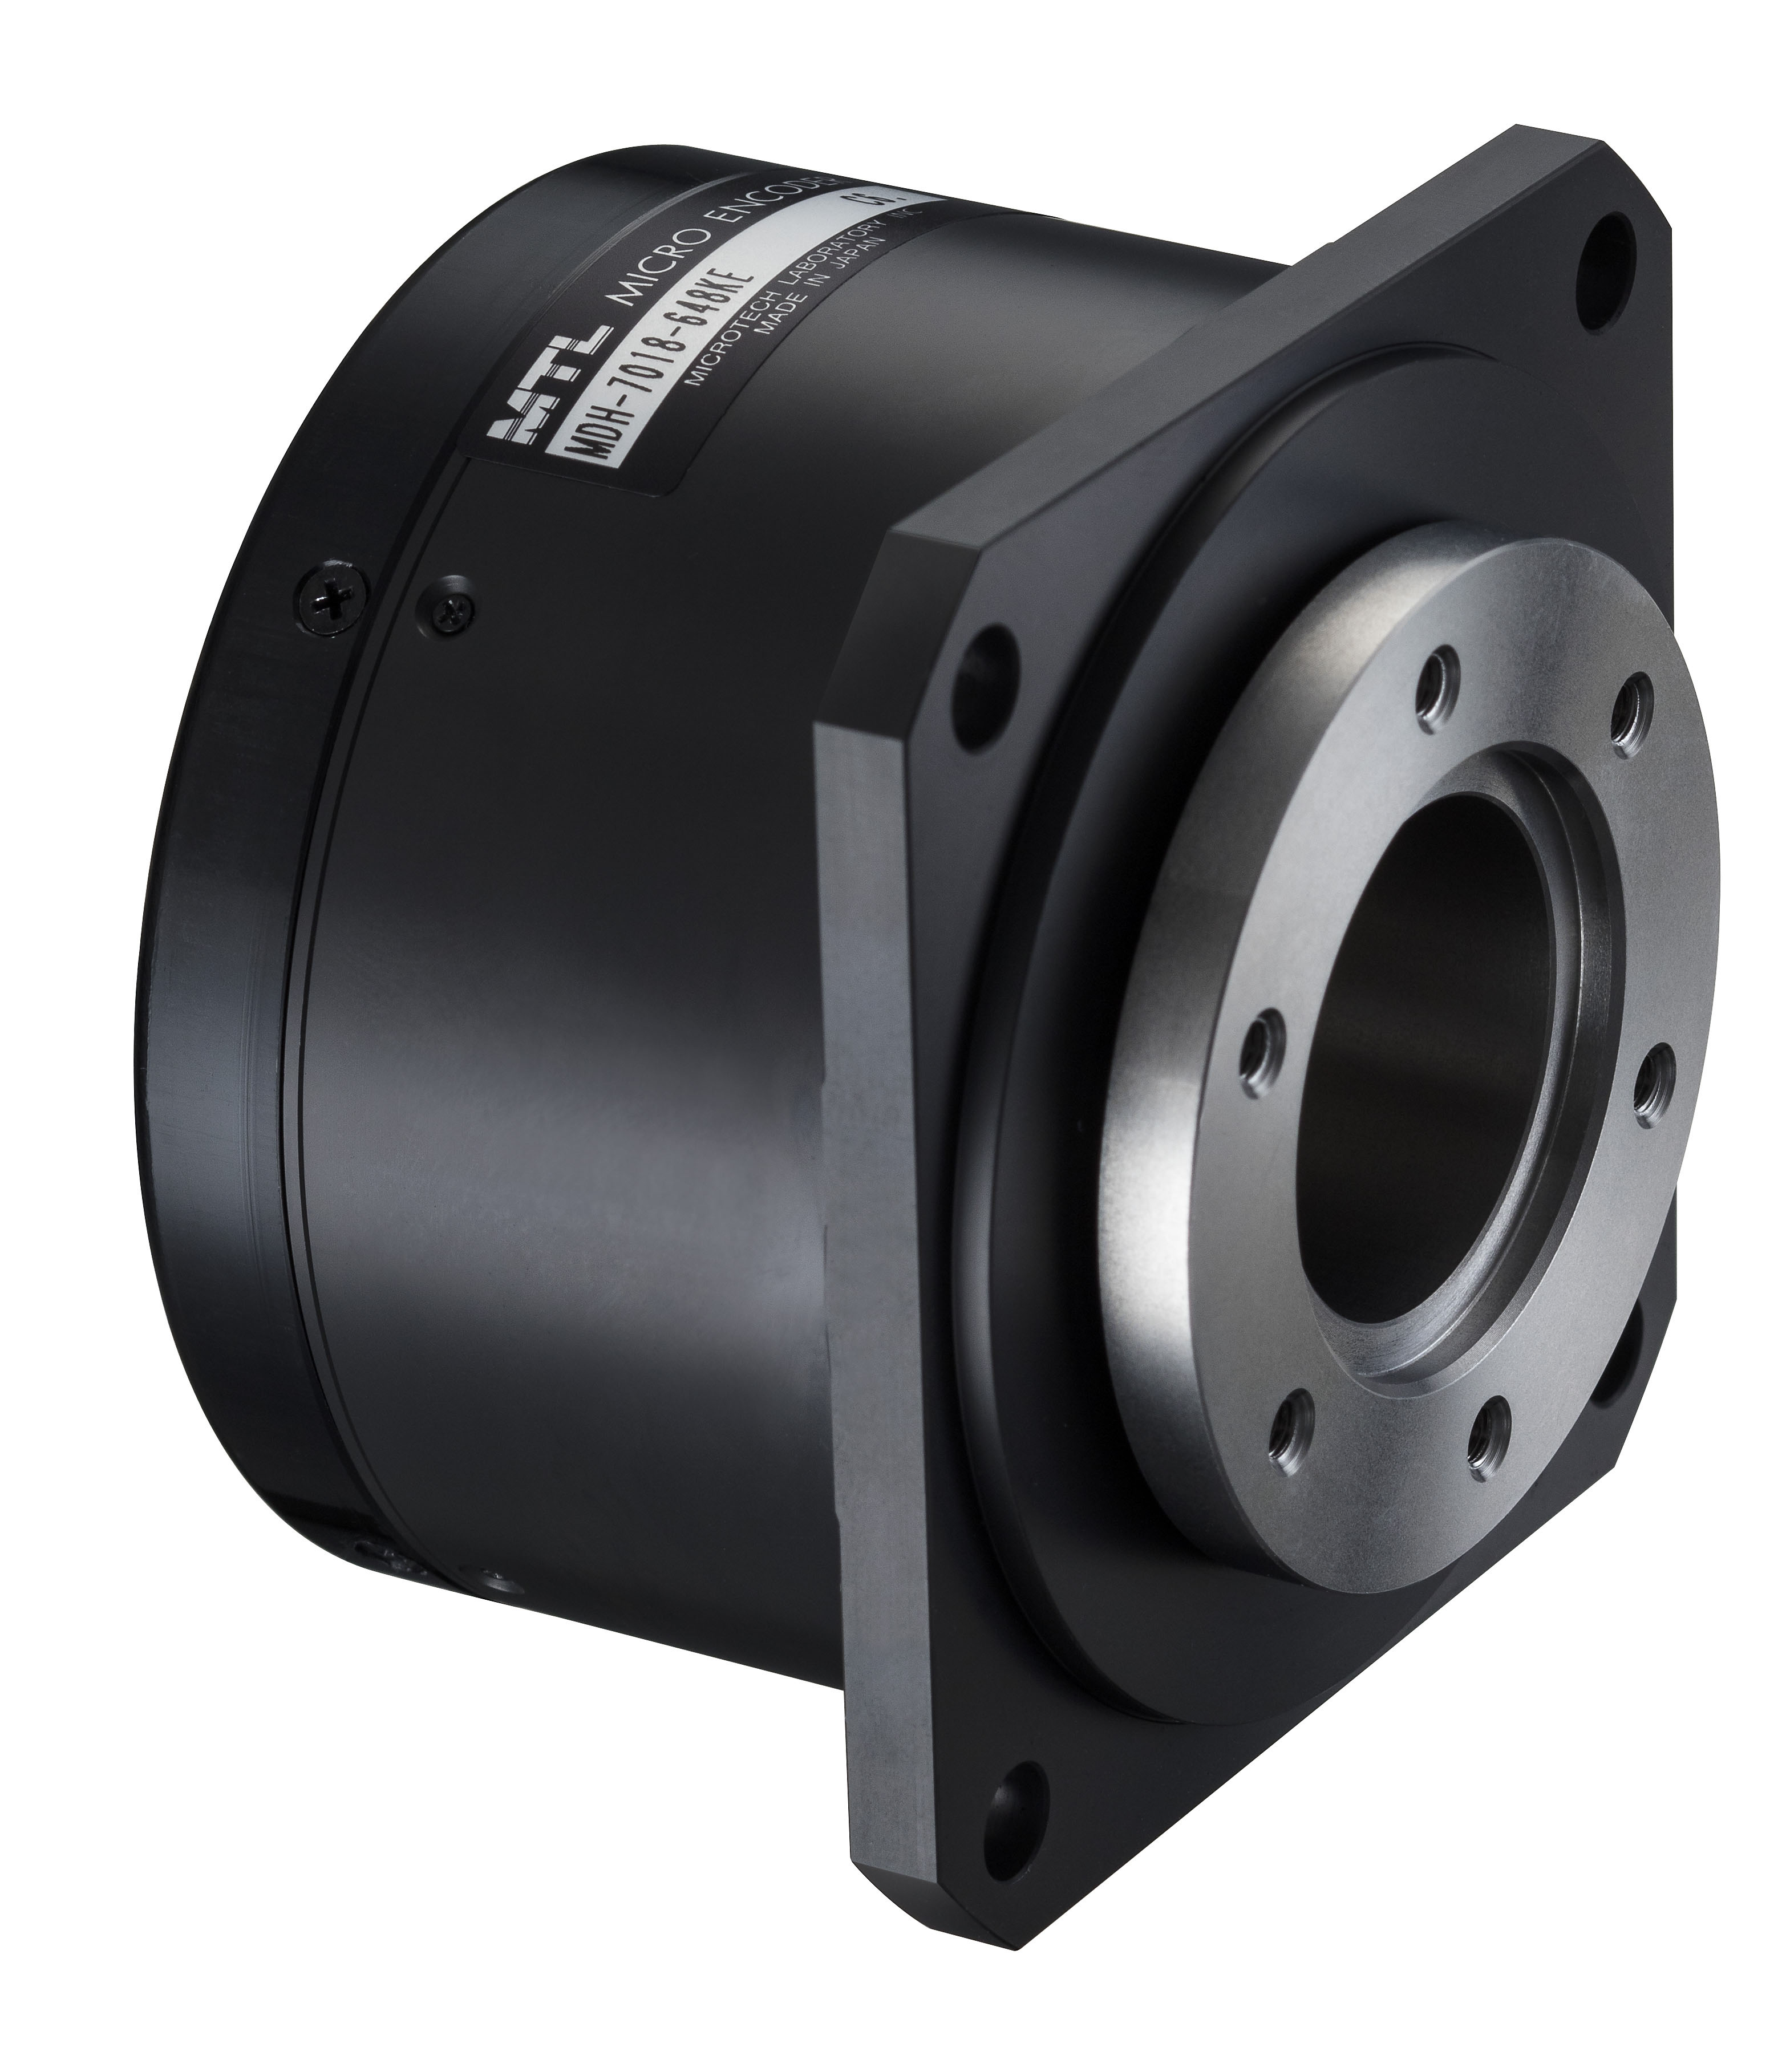 Nippon Pulse 70mm rotary servomotor with hollow shaft